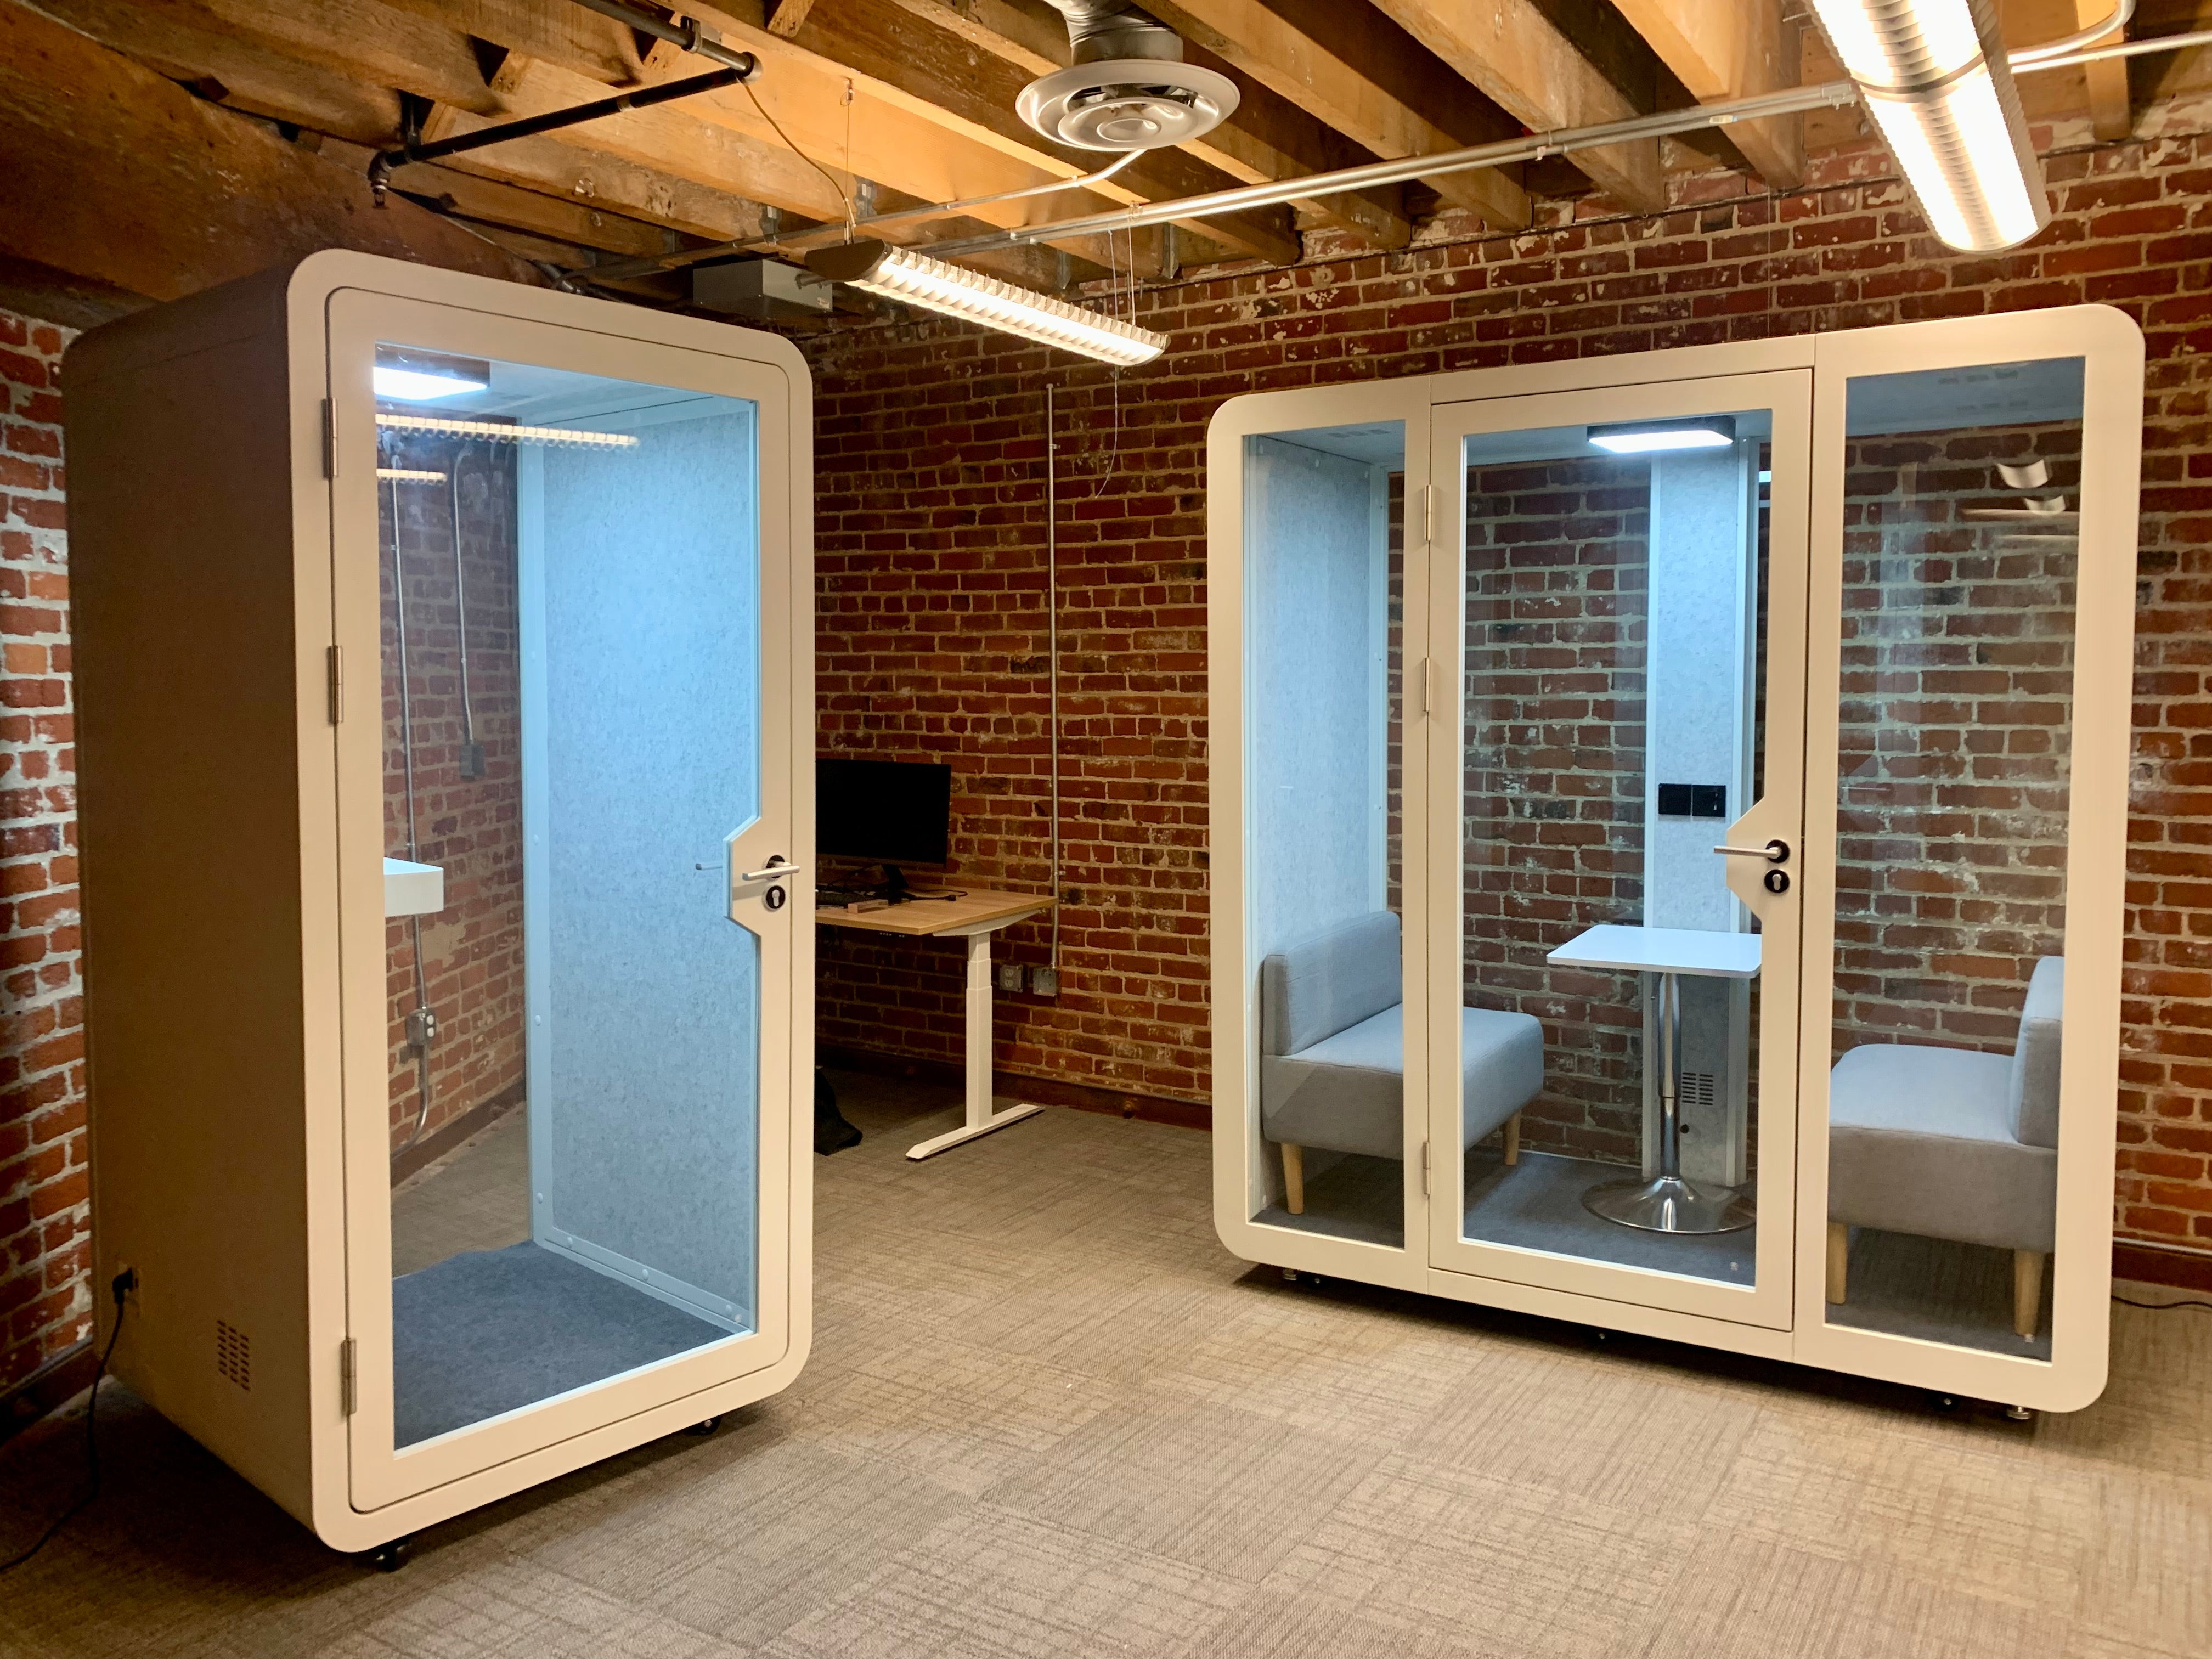 one person meeting pod and 2 person office phone booth